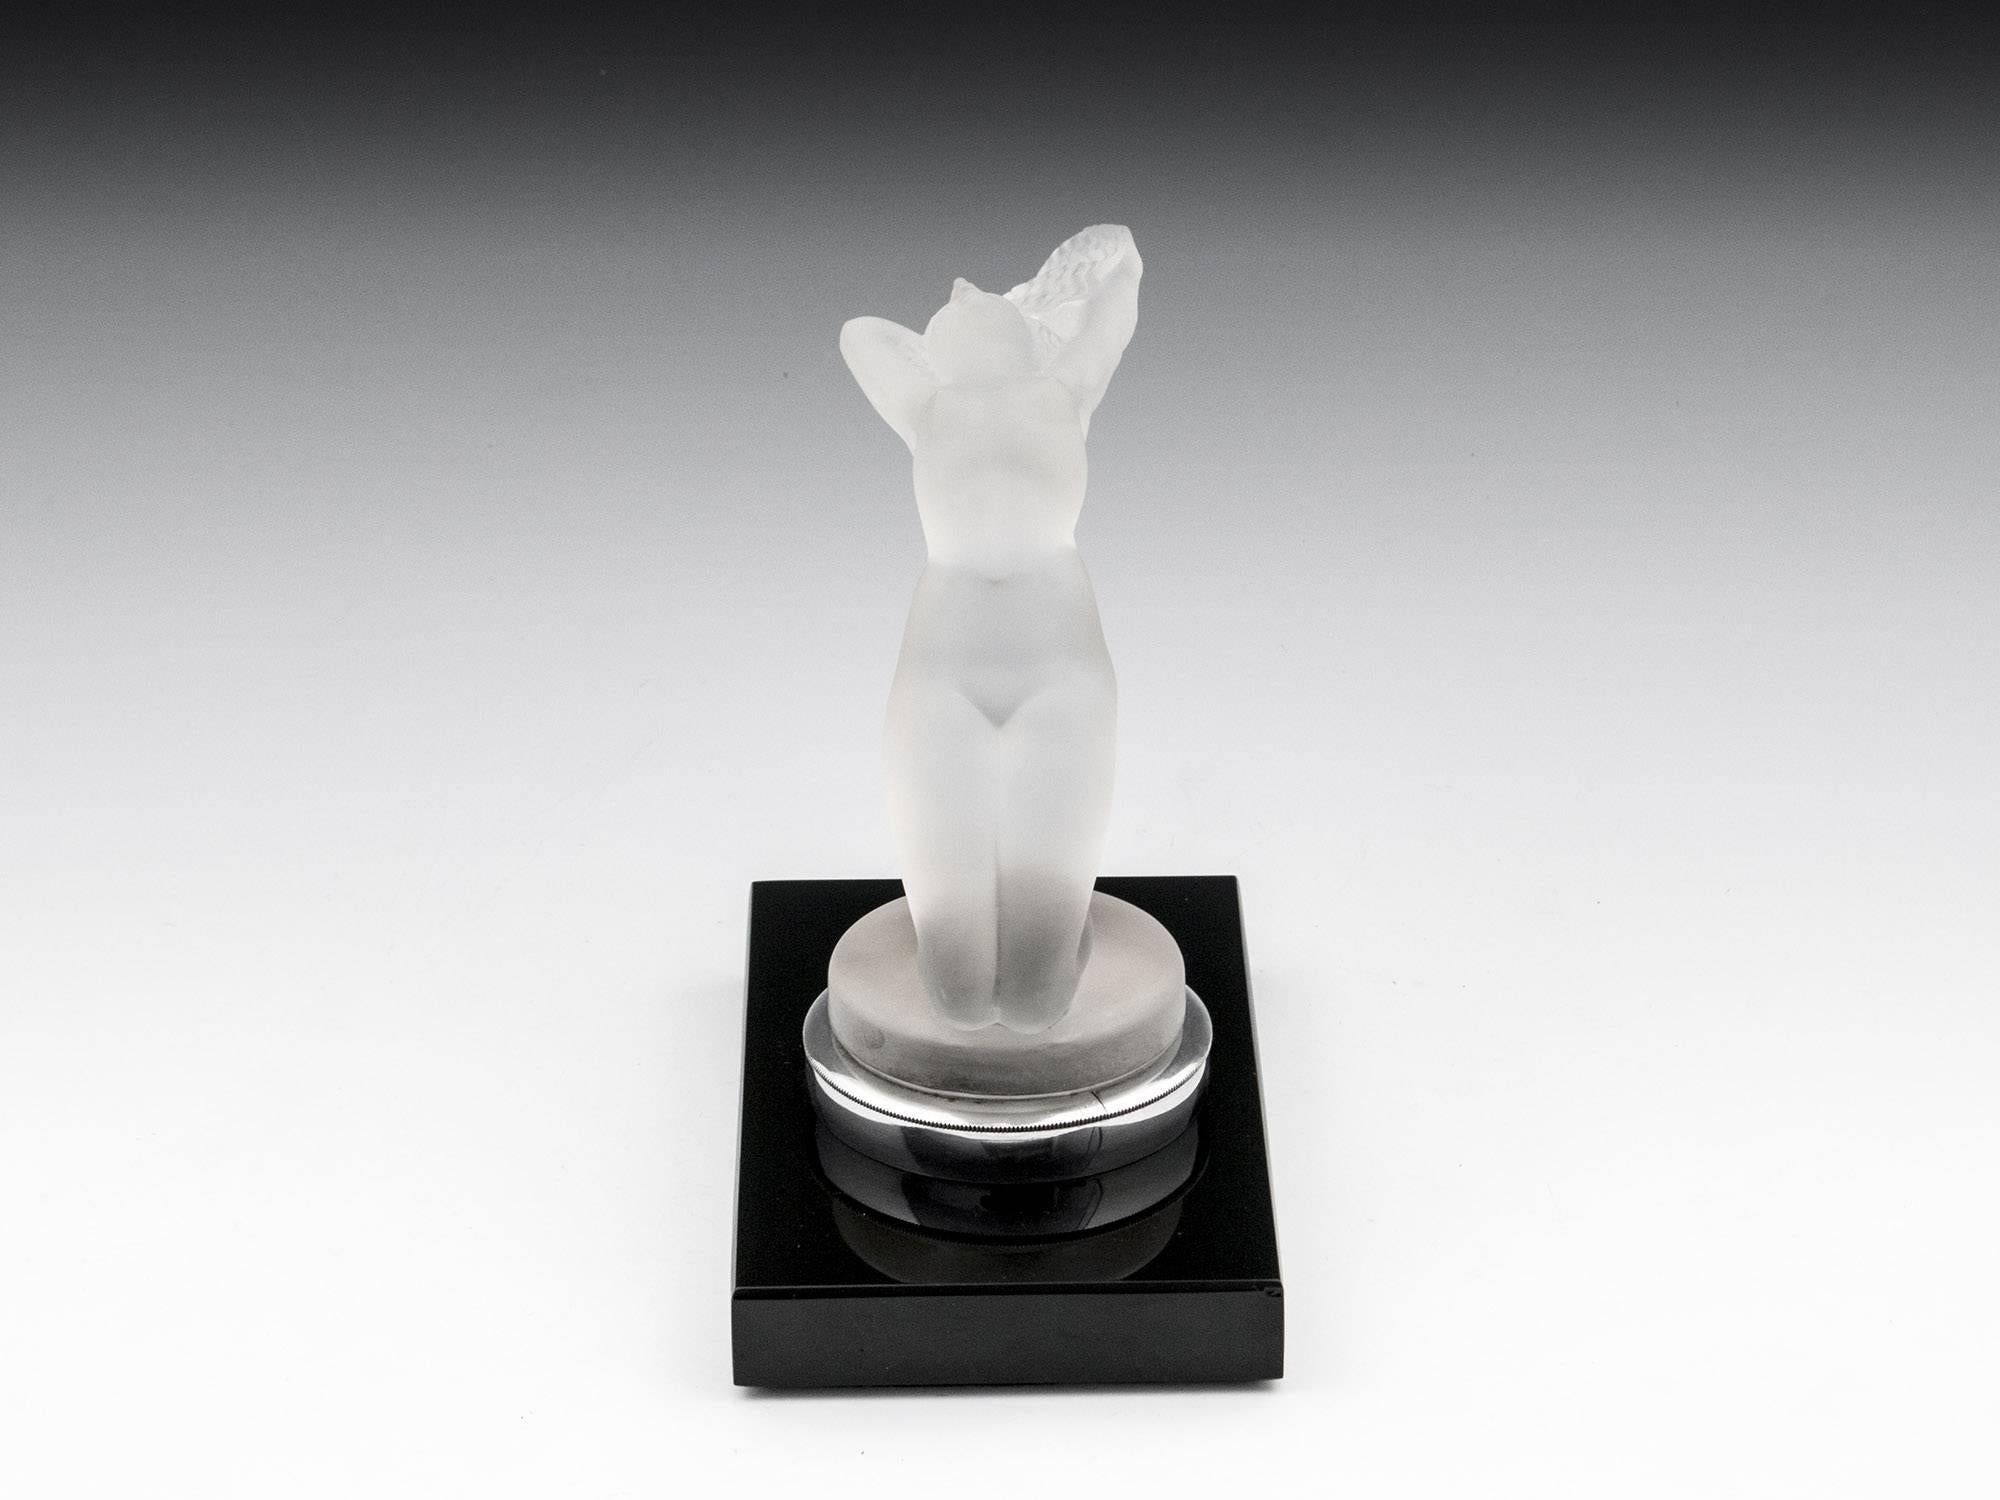 Rene Lalique Chrysis ‘female nude’. Model number 1183. Mounted on a factory fitted Lalique book end mount. Signed in stencil “R Lalique“ to the front of the mascot base.